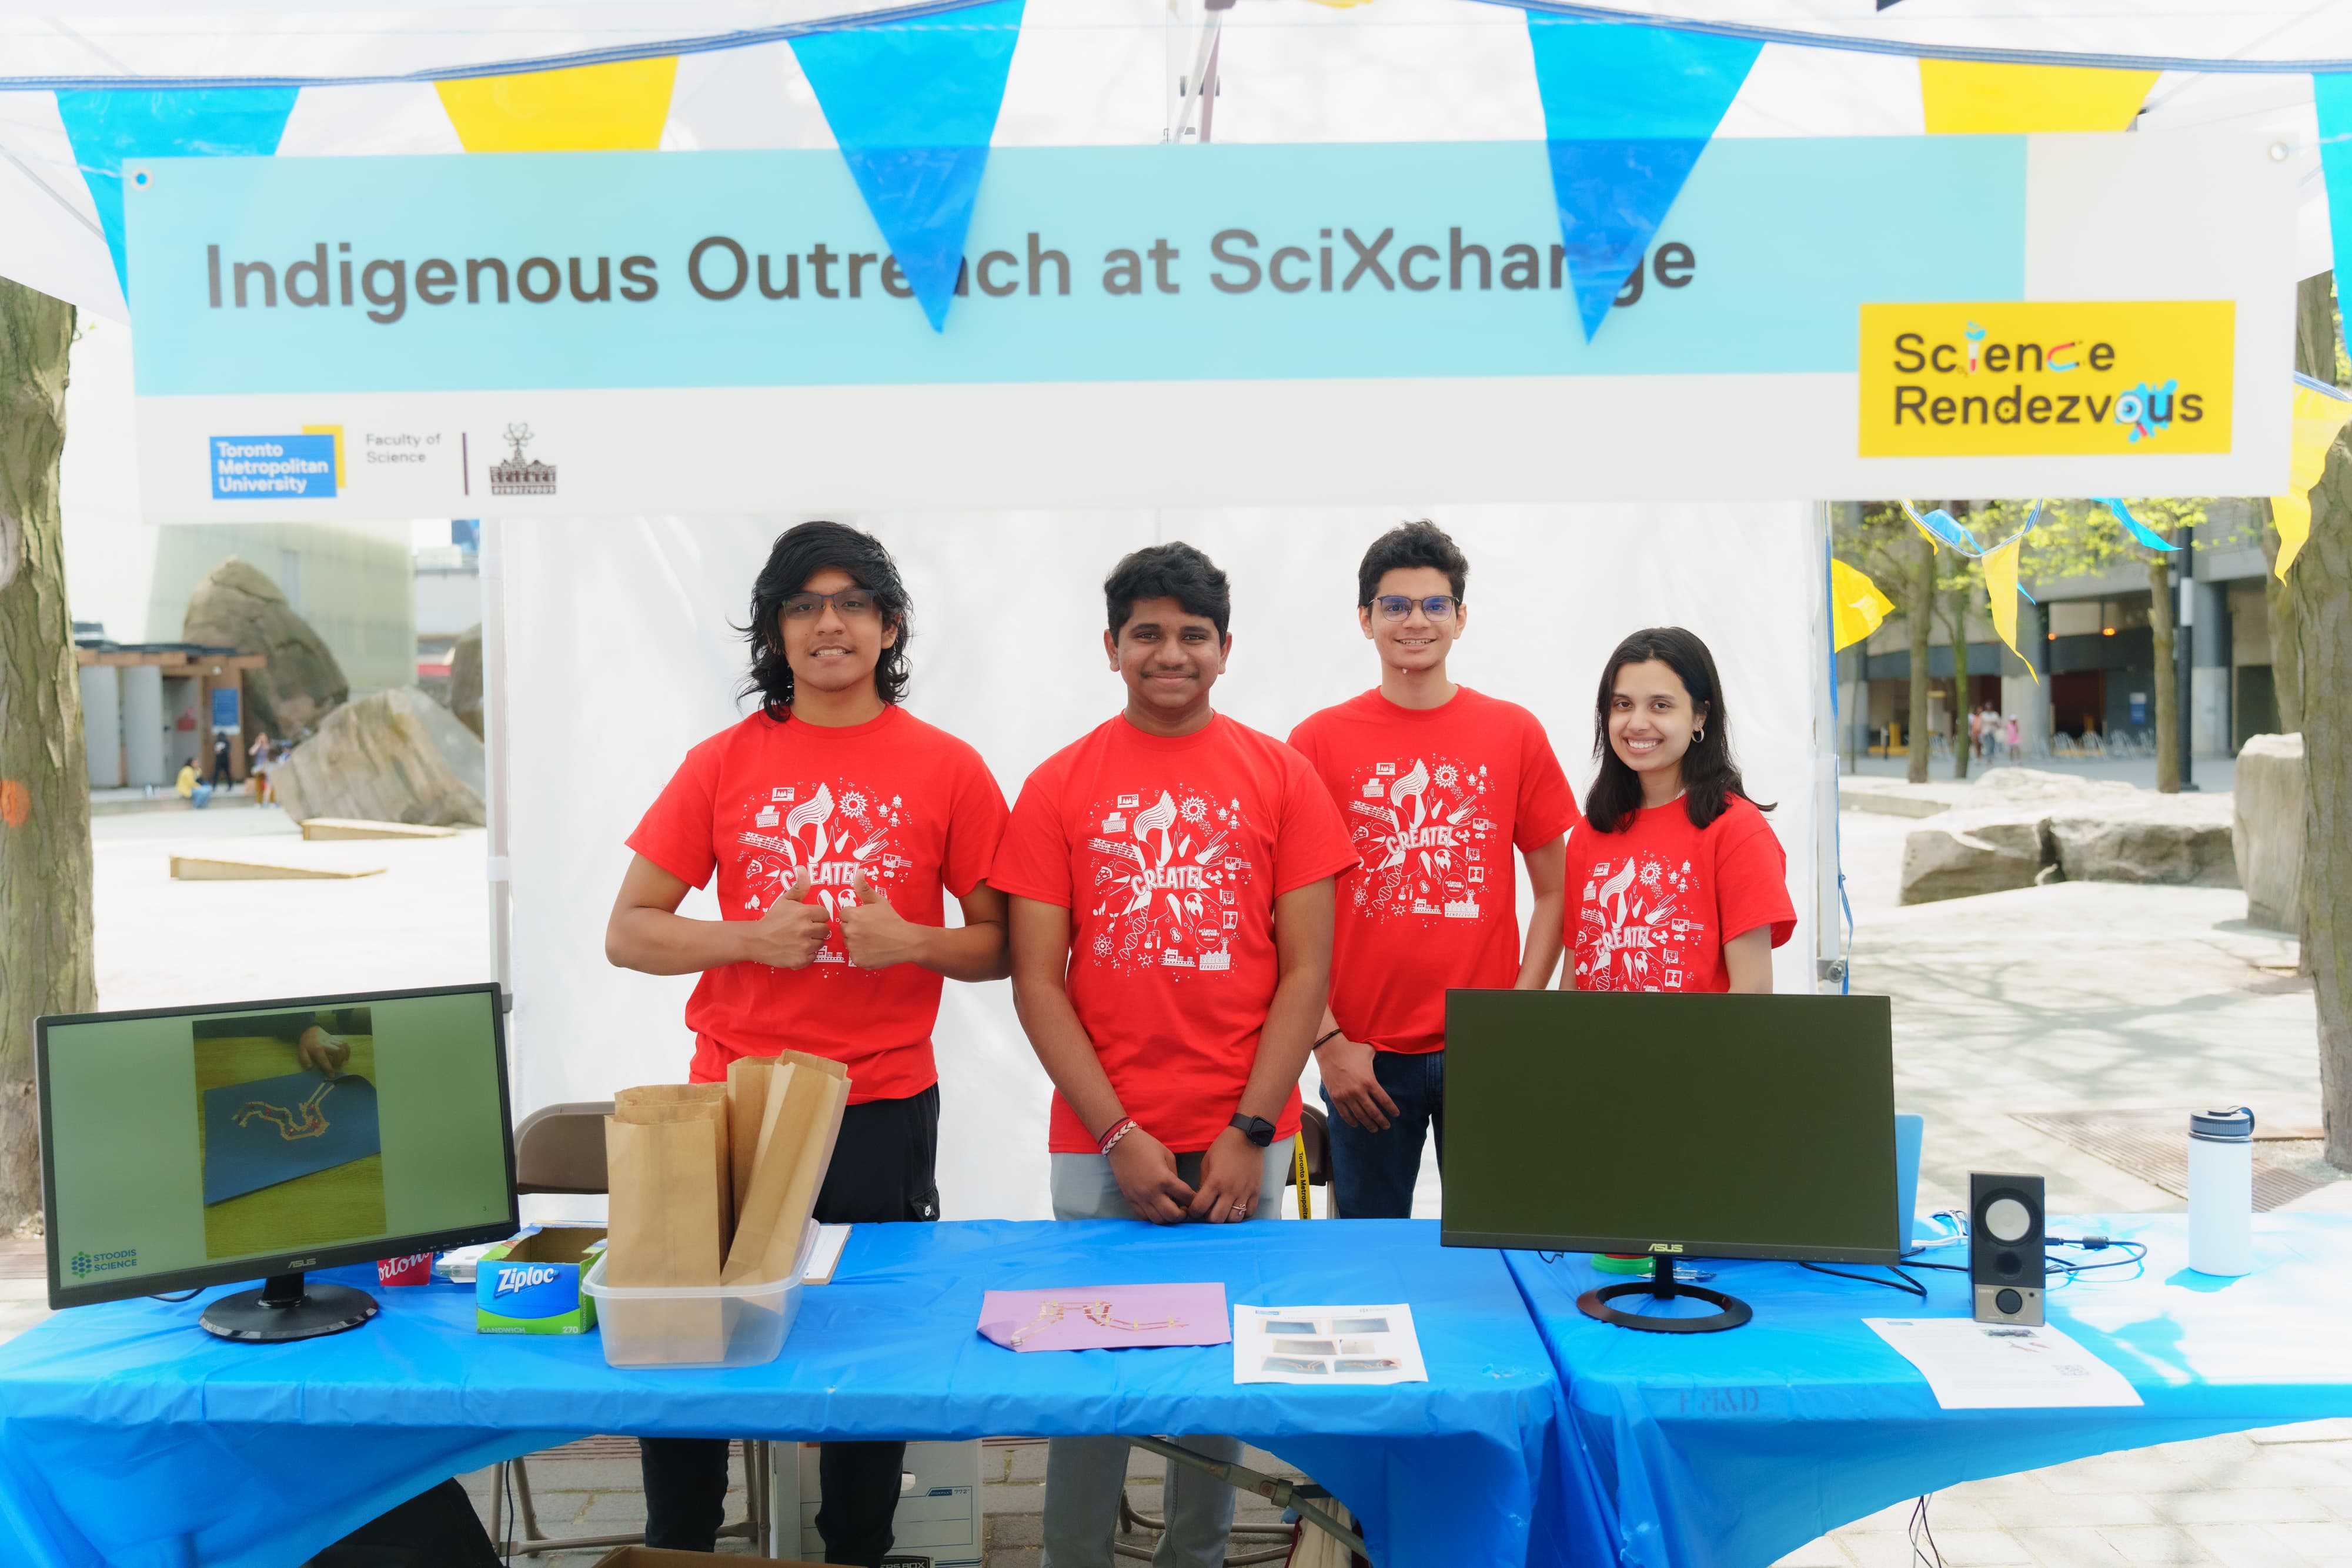 Four TMU volunteers stand at a booth under a banner saying "Indigenous Outreach at SciXchange"